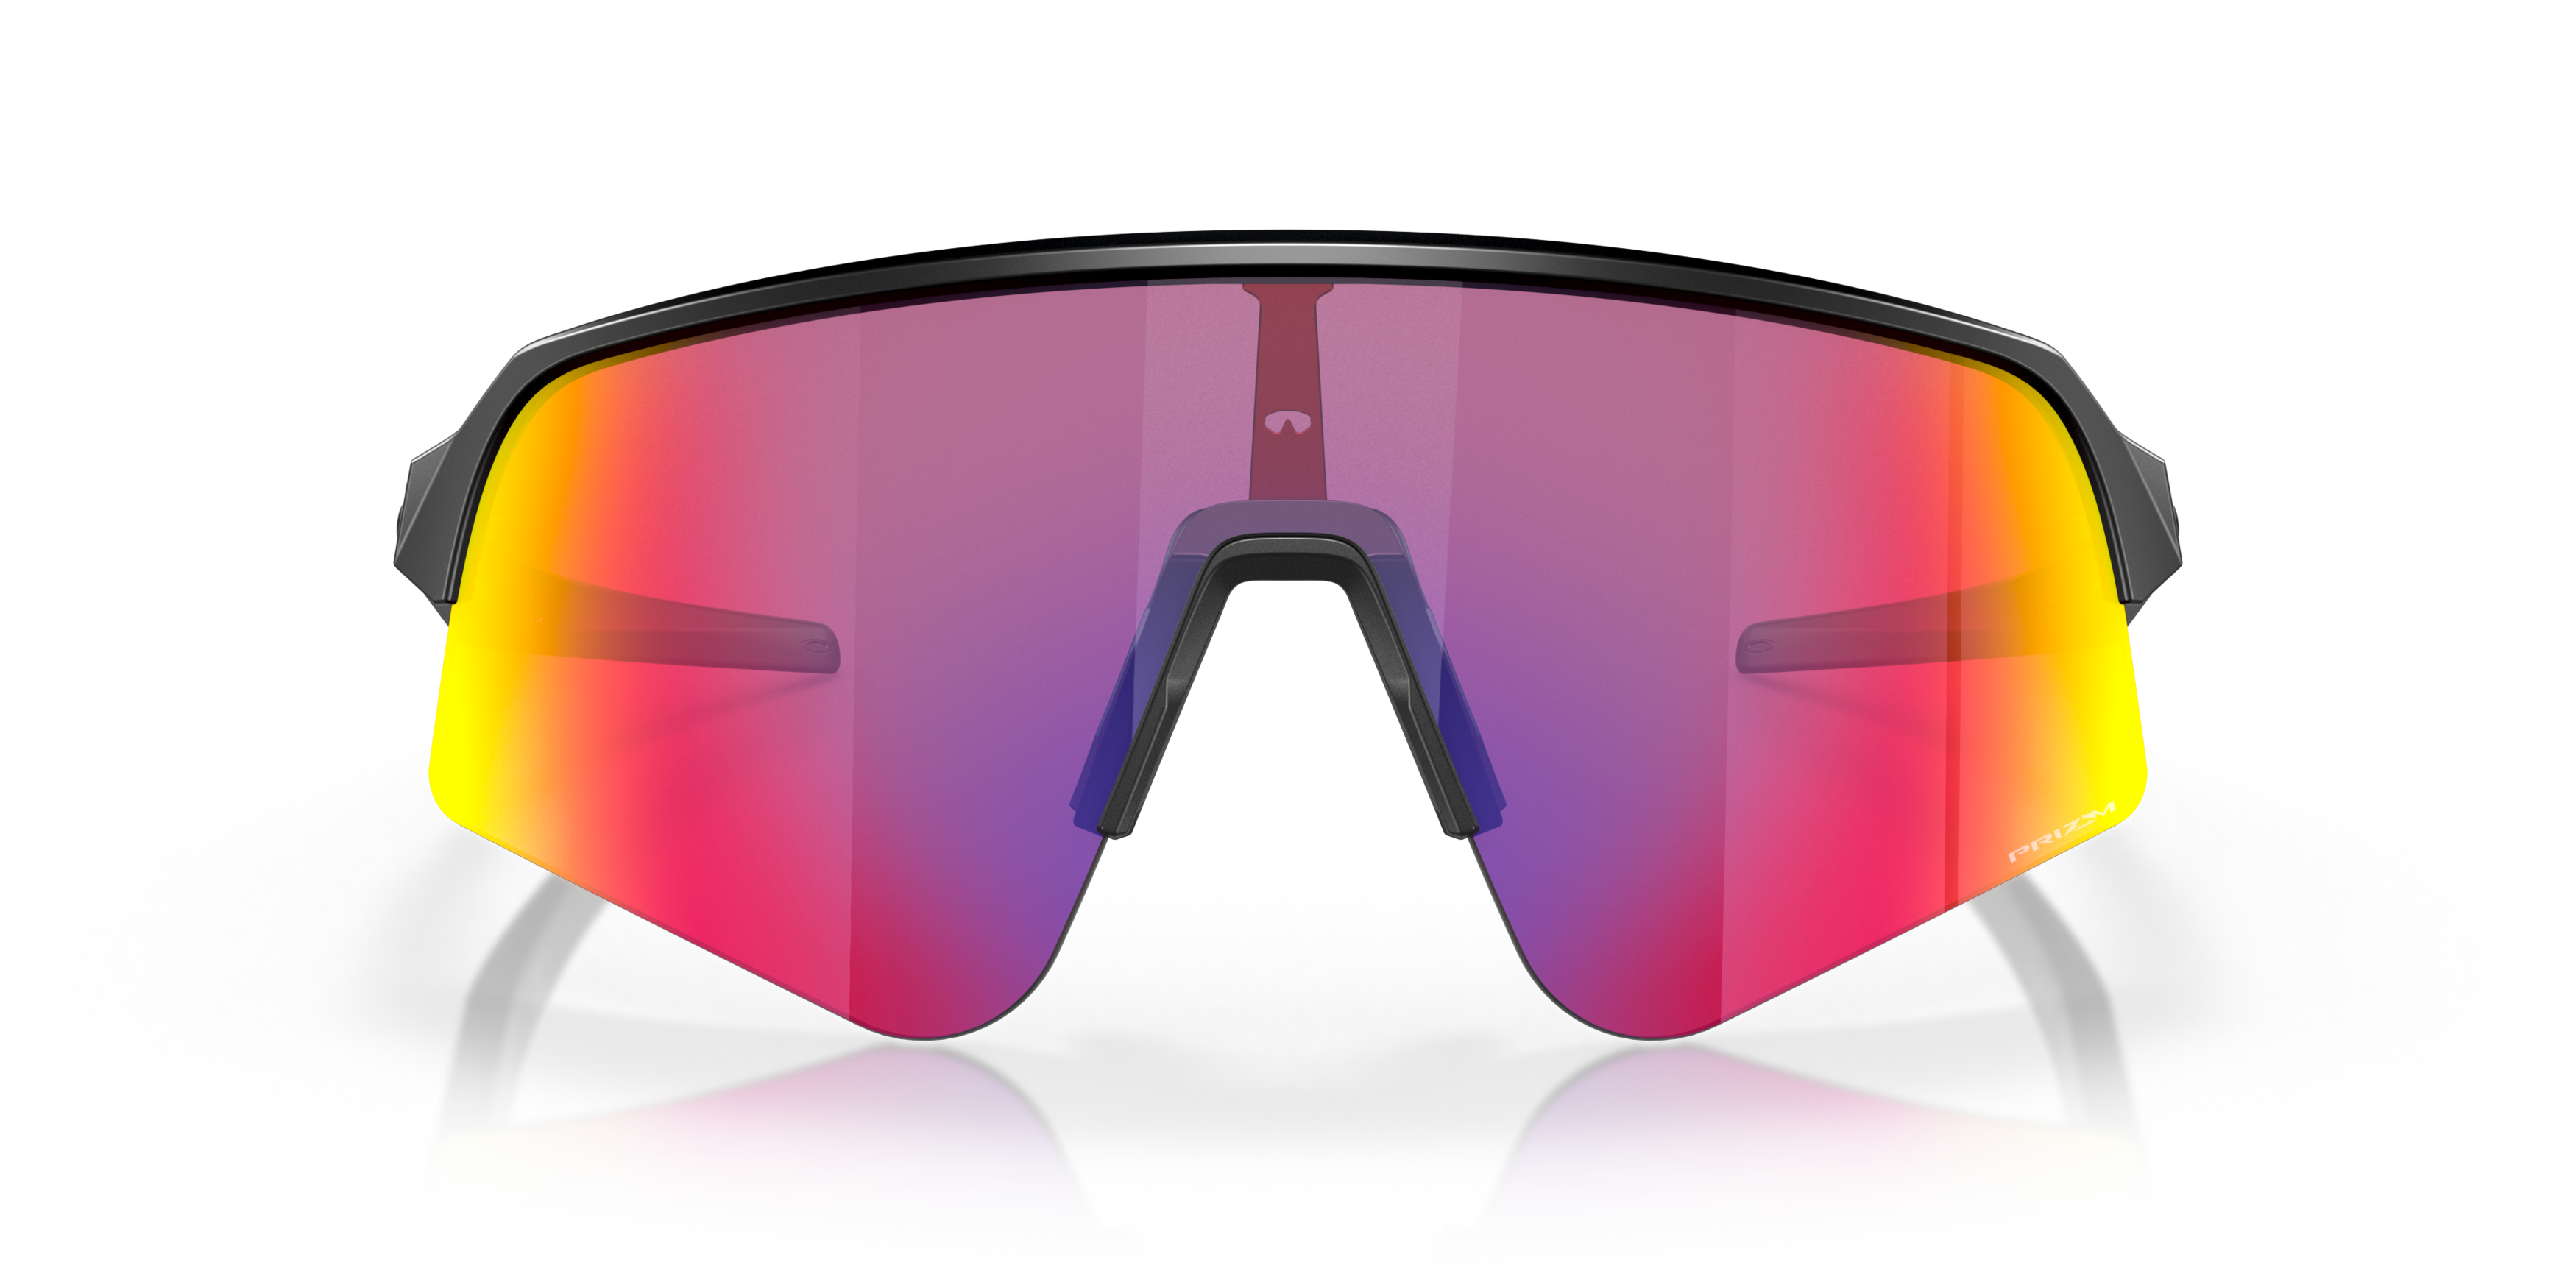 [products.image.front] Oakley Sutro Lite Sweep 0OO9465 946501